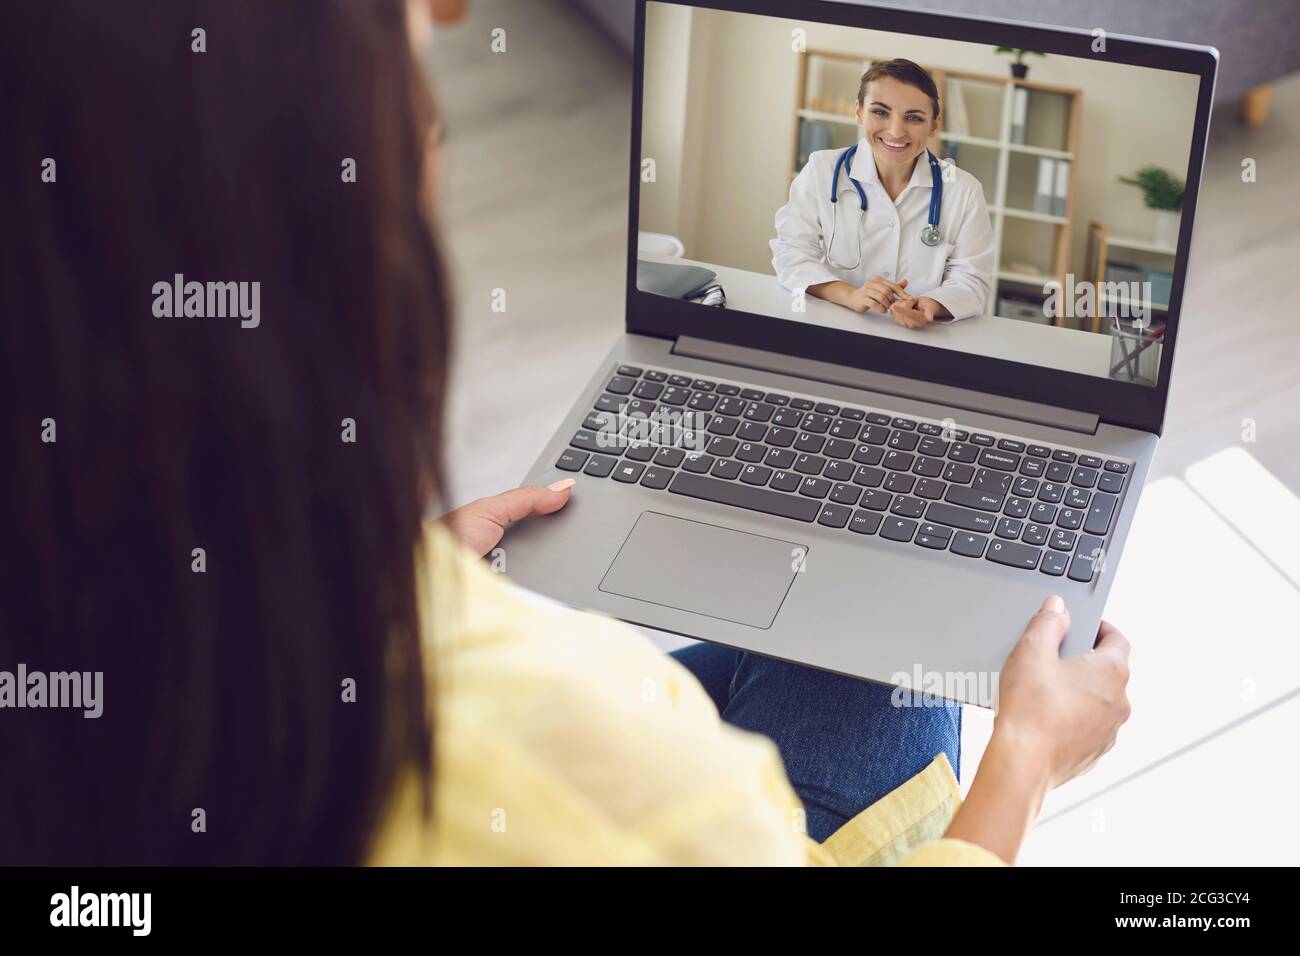 Online doctor consultation. Woman is at home, uses online doctor service. Stock Photo